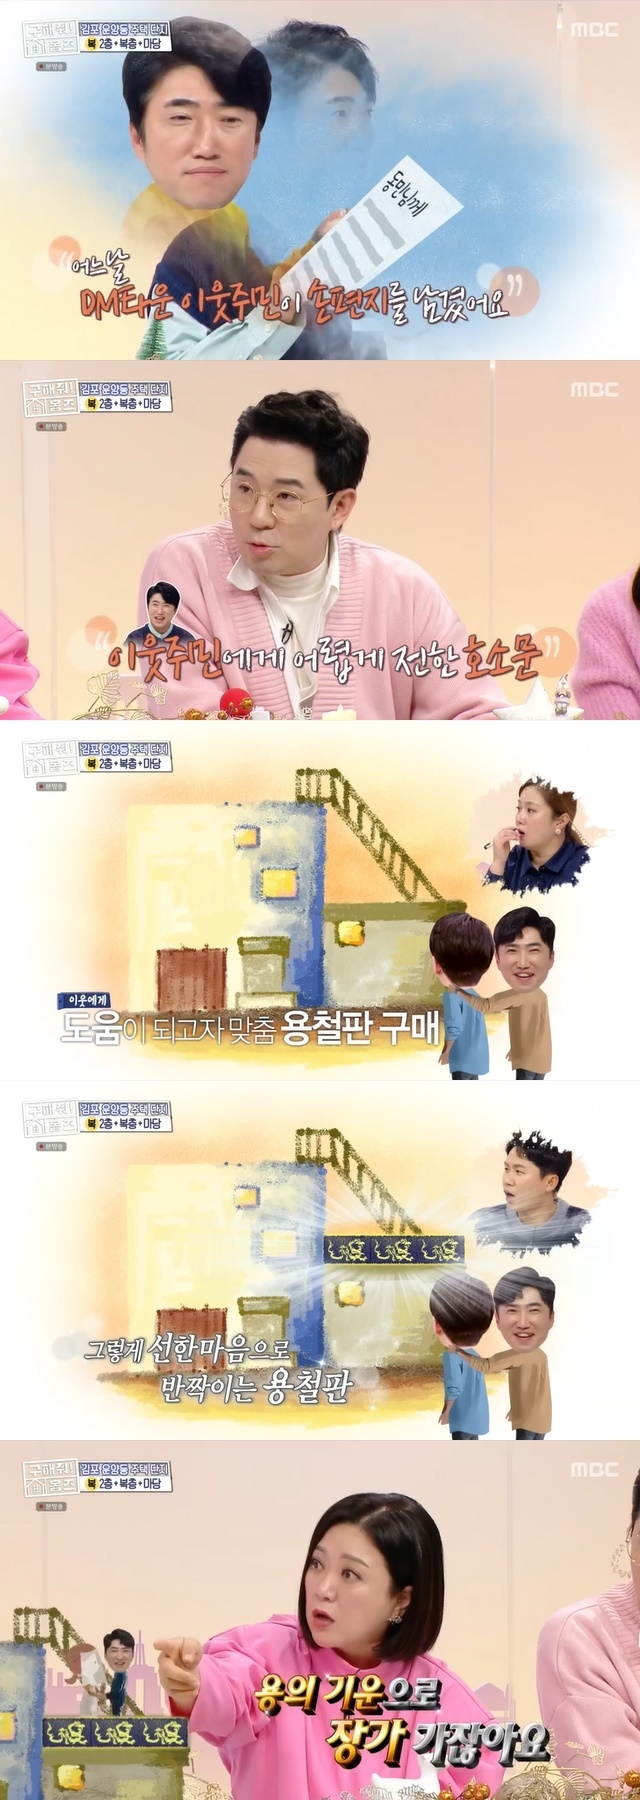 Jang Dong-min reveals self-missamIn the 138th MBC entertainment Where is My Home (hereinafter referred to as Homes) broadcast on December 26, a house that does not protect privacy was introduced because Fences was not installed.Teppan for the Power House of Jang Dong-min was mentioned in the appearance of a house where there is no Fences and privacy is revealed.Jang Dong-min has released his self-taught story about Teppan, which he has been hiding.Jang Dong-min said, I actually went to Wonju house and I cried when I saw a hand letter, I cried when I saw the letter.Then I asked him to do his business (Teppan for business) at my house, so I could help him do what he does. Boom, Yang Se-chan, and Kim Sook, who have been teasing Jang Dong-min, have responded 180 degrees to the question, It is a technology that is much cooler than bamboo and can not shine when the light falls, and Did not you install the dragon and go to the market immediately?